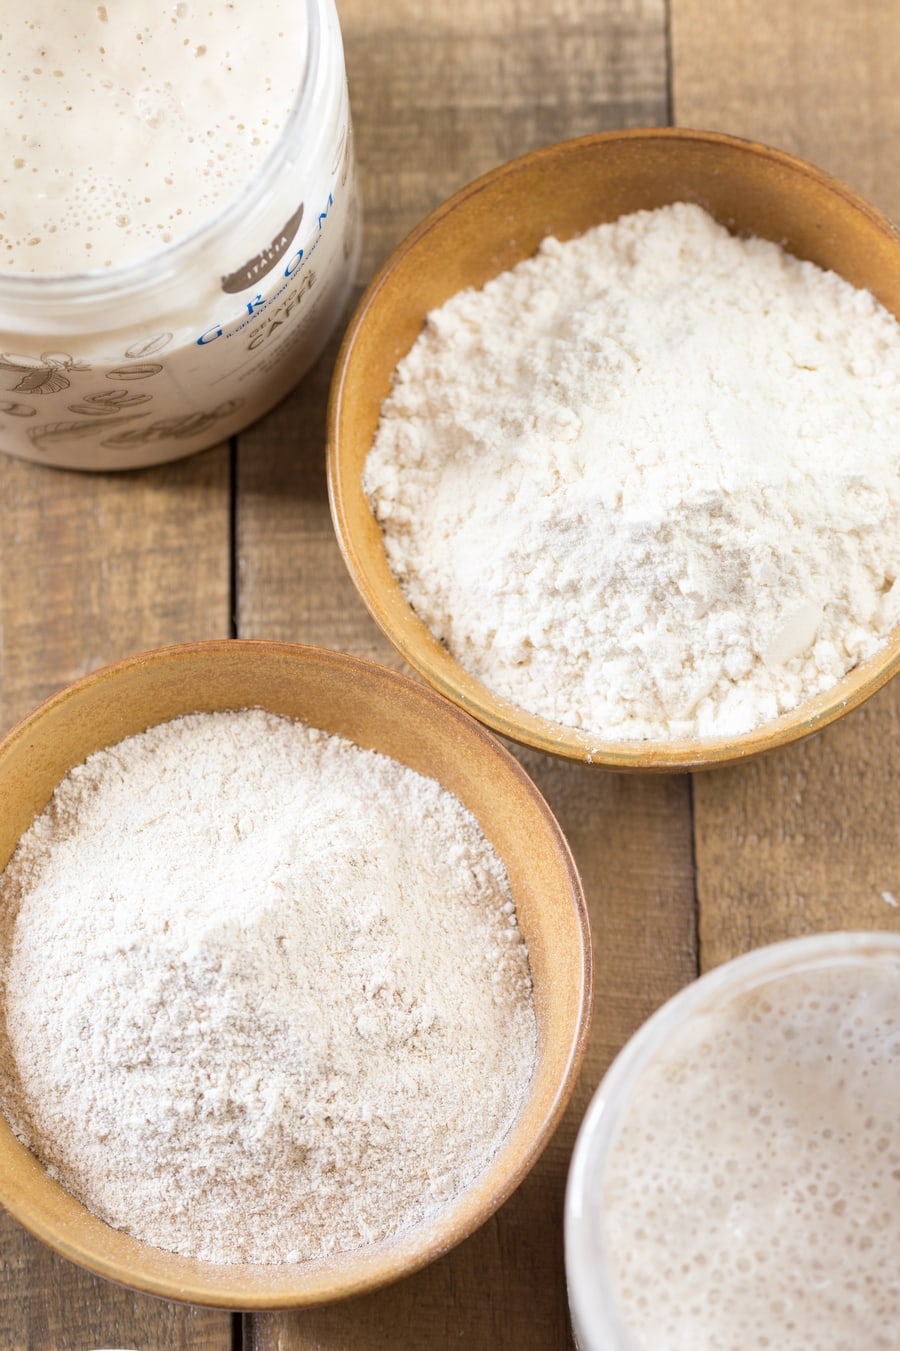 Two different types of flour in two bowls next to each other.